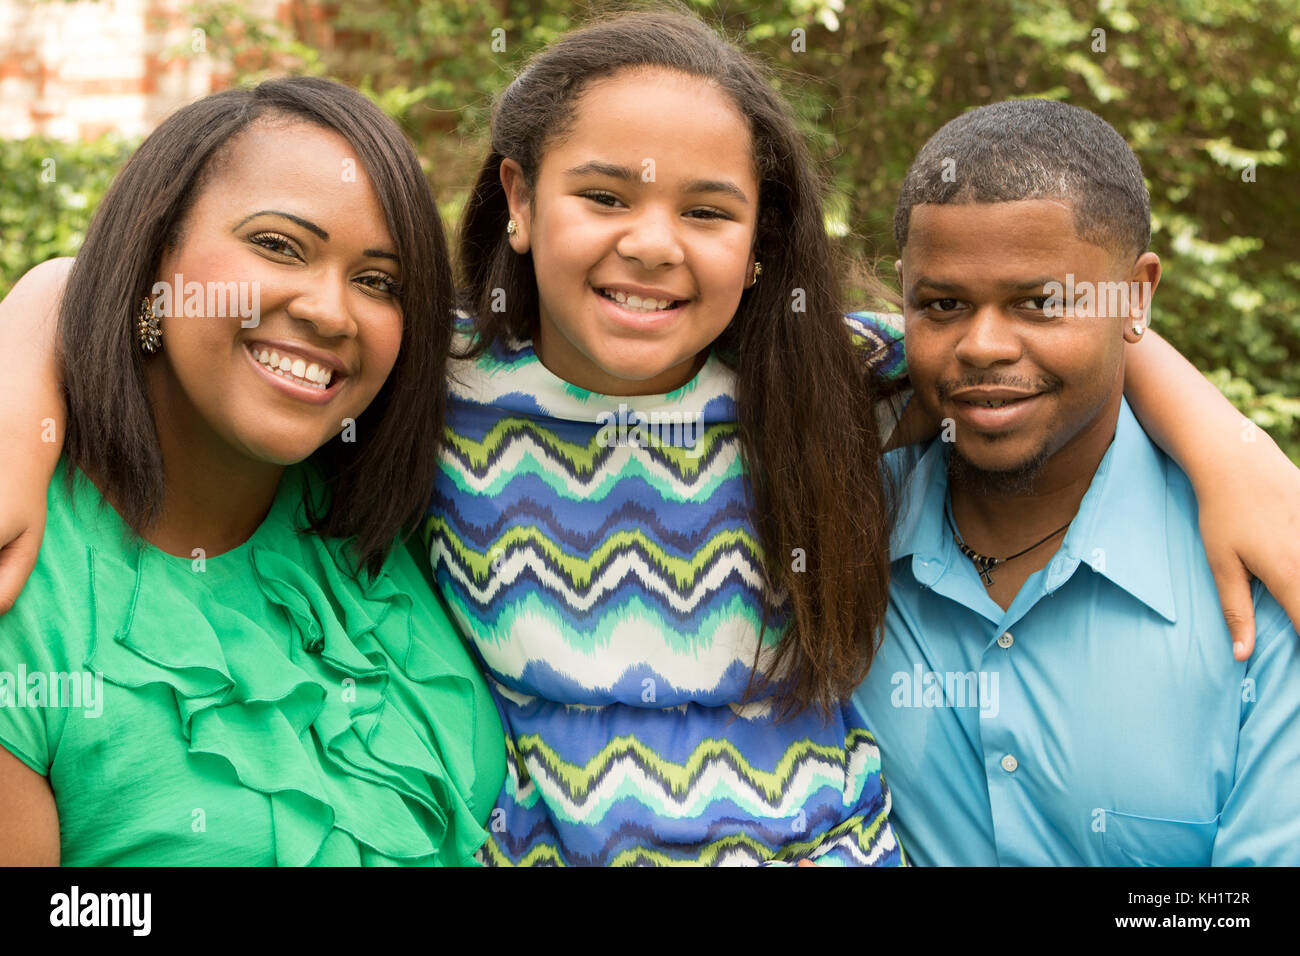 Portrait Of Happy African American Family. Stockfoto